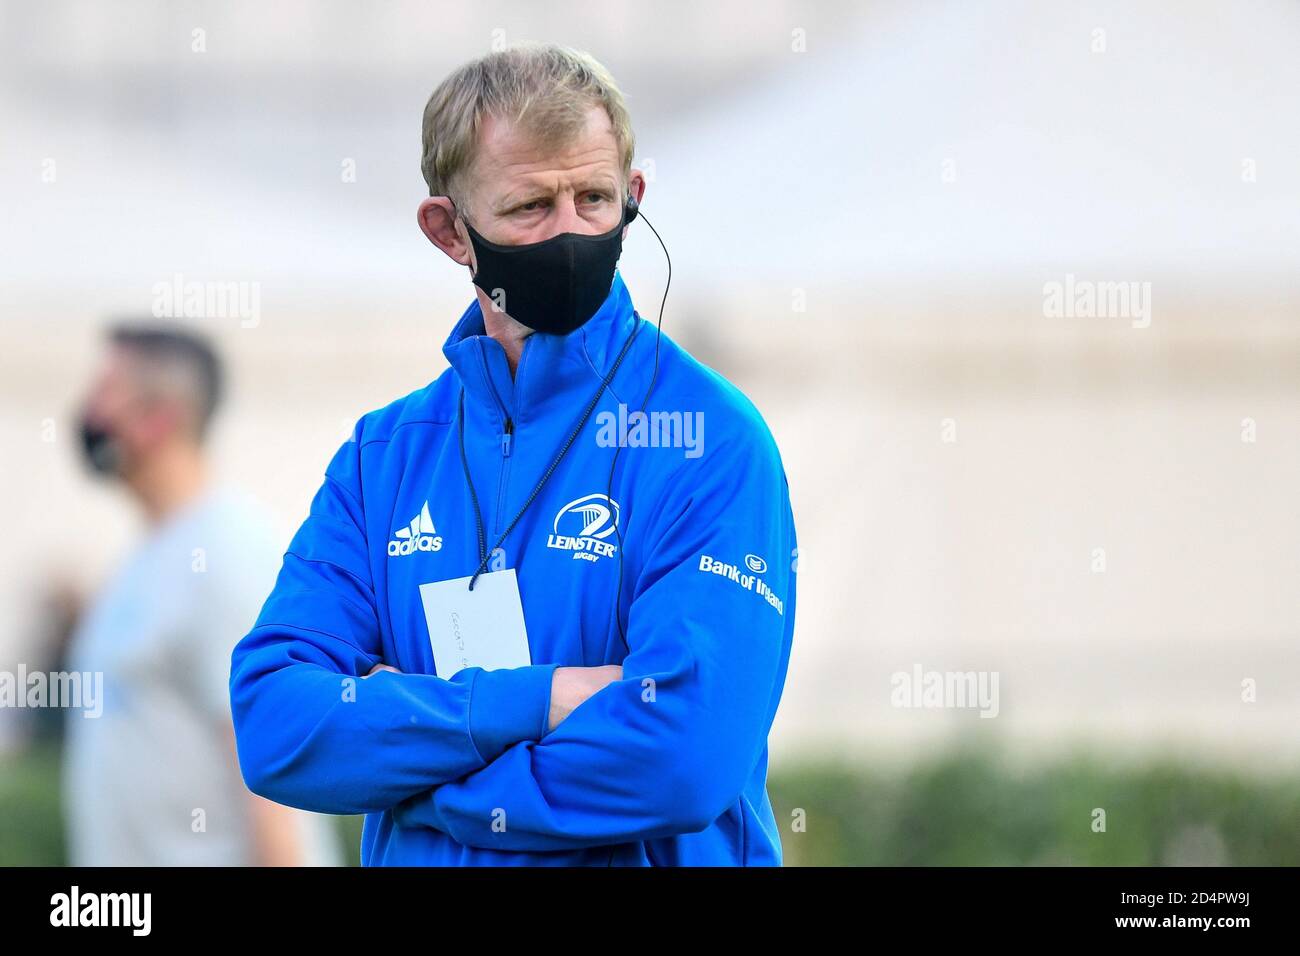 Monigo Stadium, Treviso, Italy, 10 Oct 2020, Leo Cullen (Coach Leinster Rugby) during Benetton Treviso vs Leinster Rugby, Rugby Guinness Pro 14 - Credit: LM/Ettore Griffoni/Alamy Live News Stock Photo